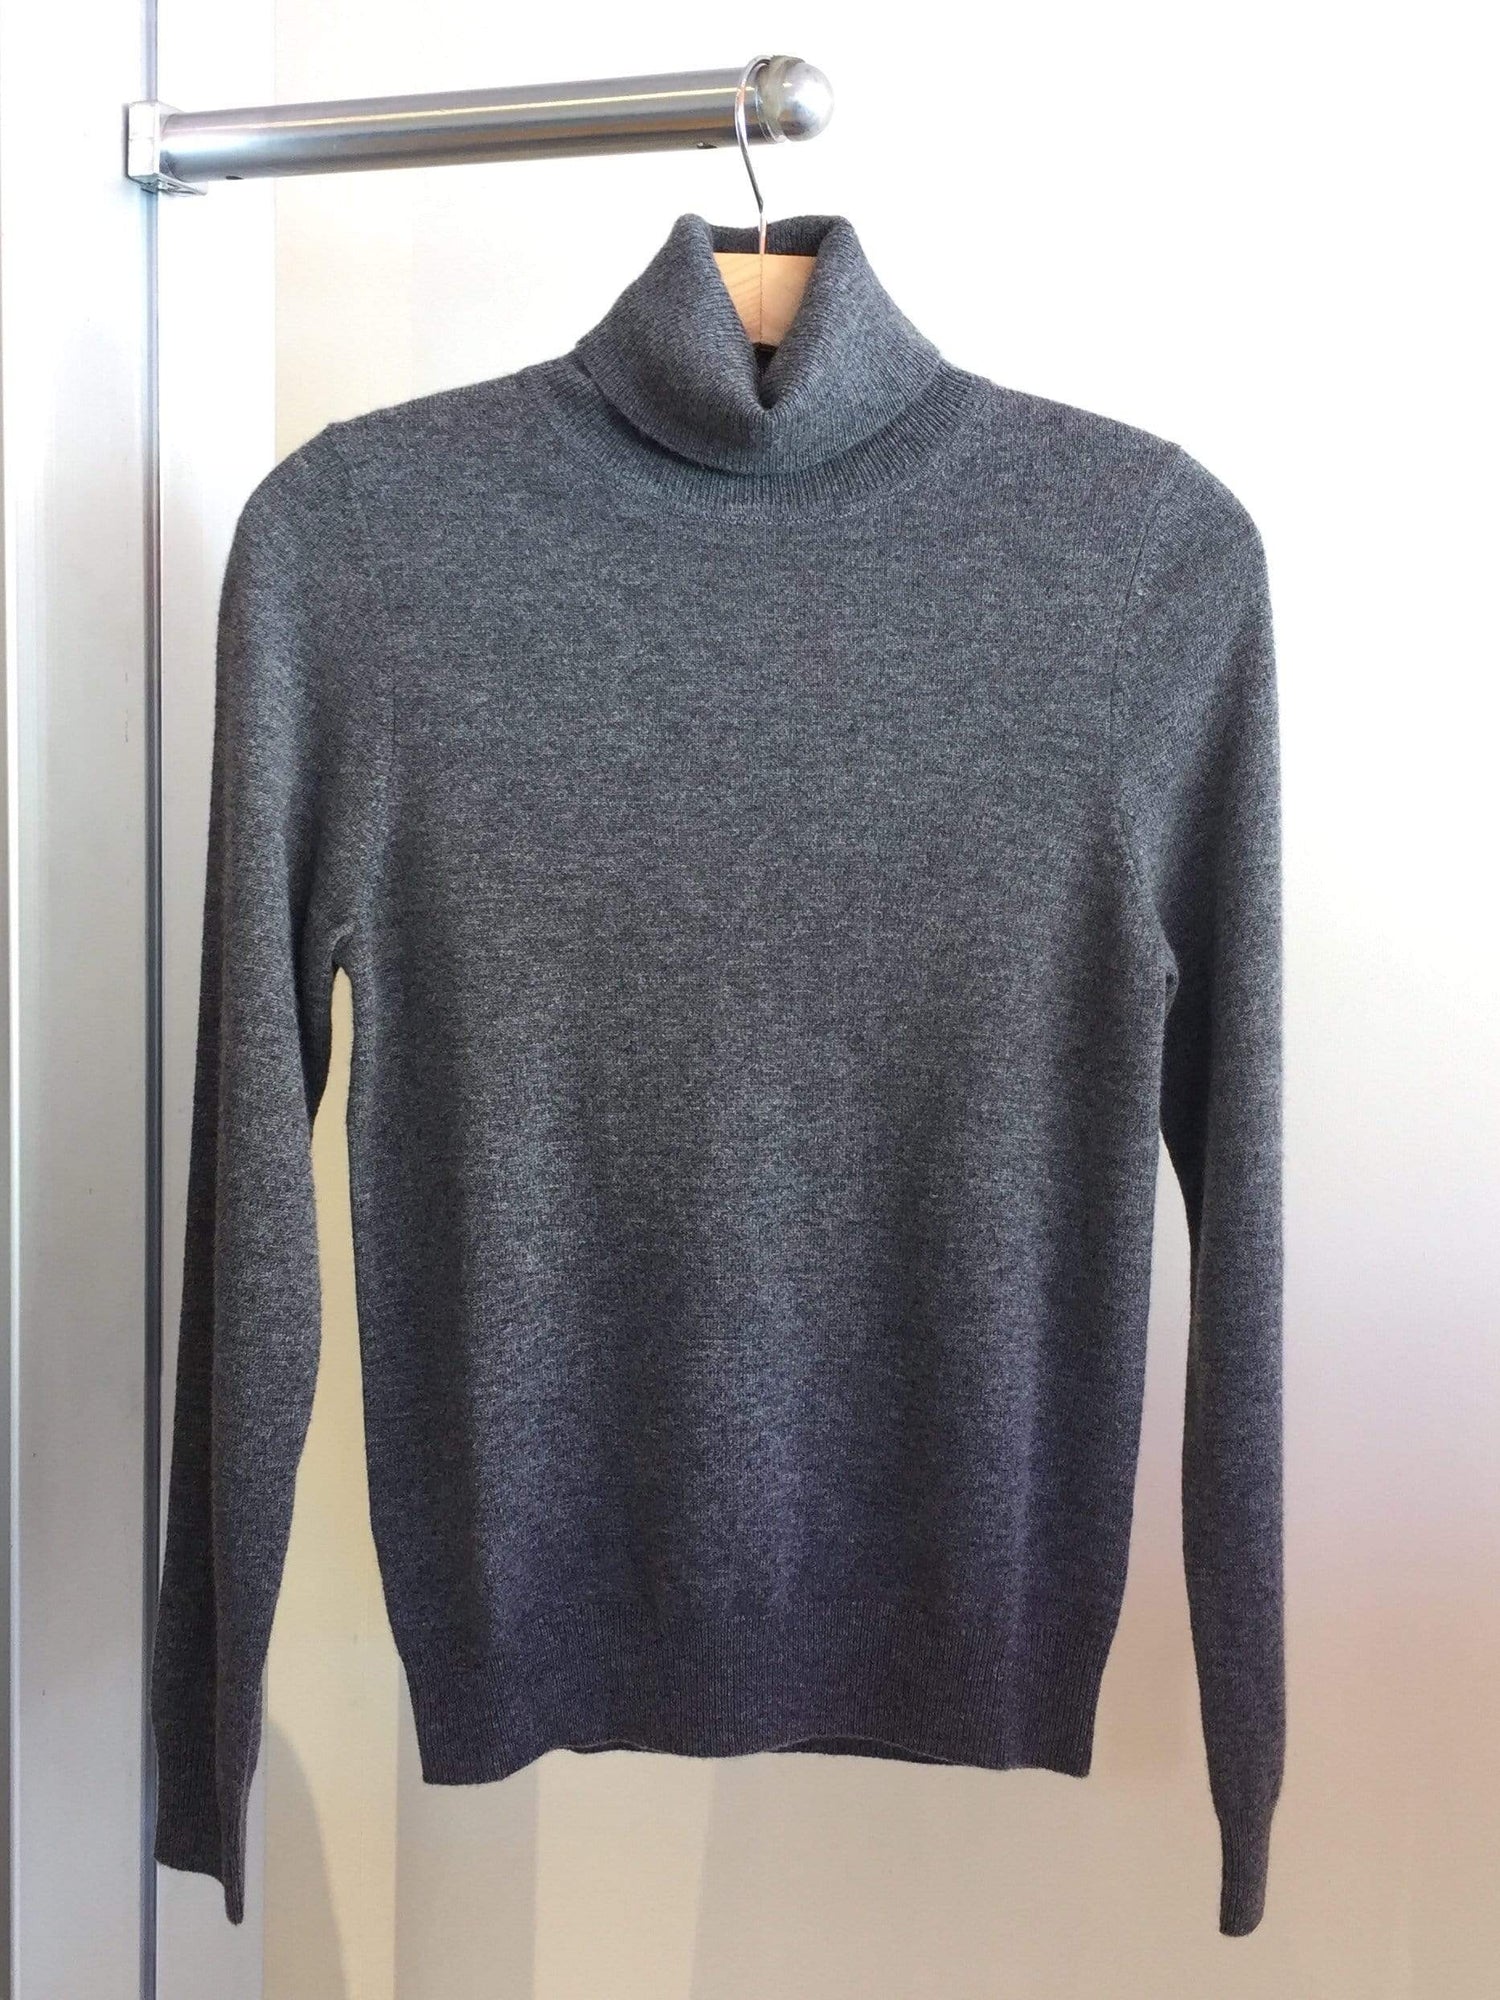 Repeat Cashmere Turtleneck Sweater in Med Grey